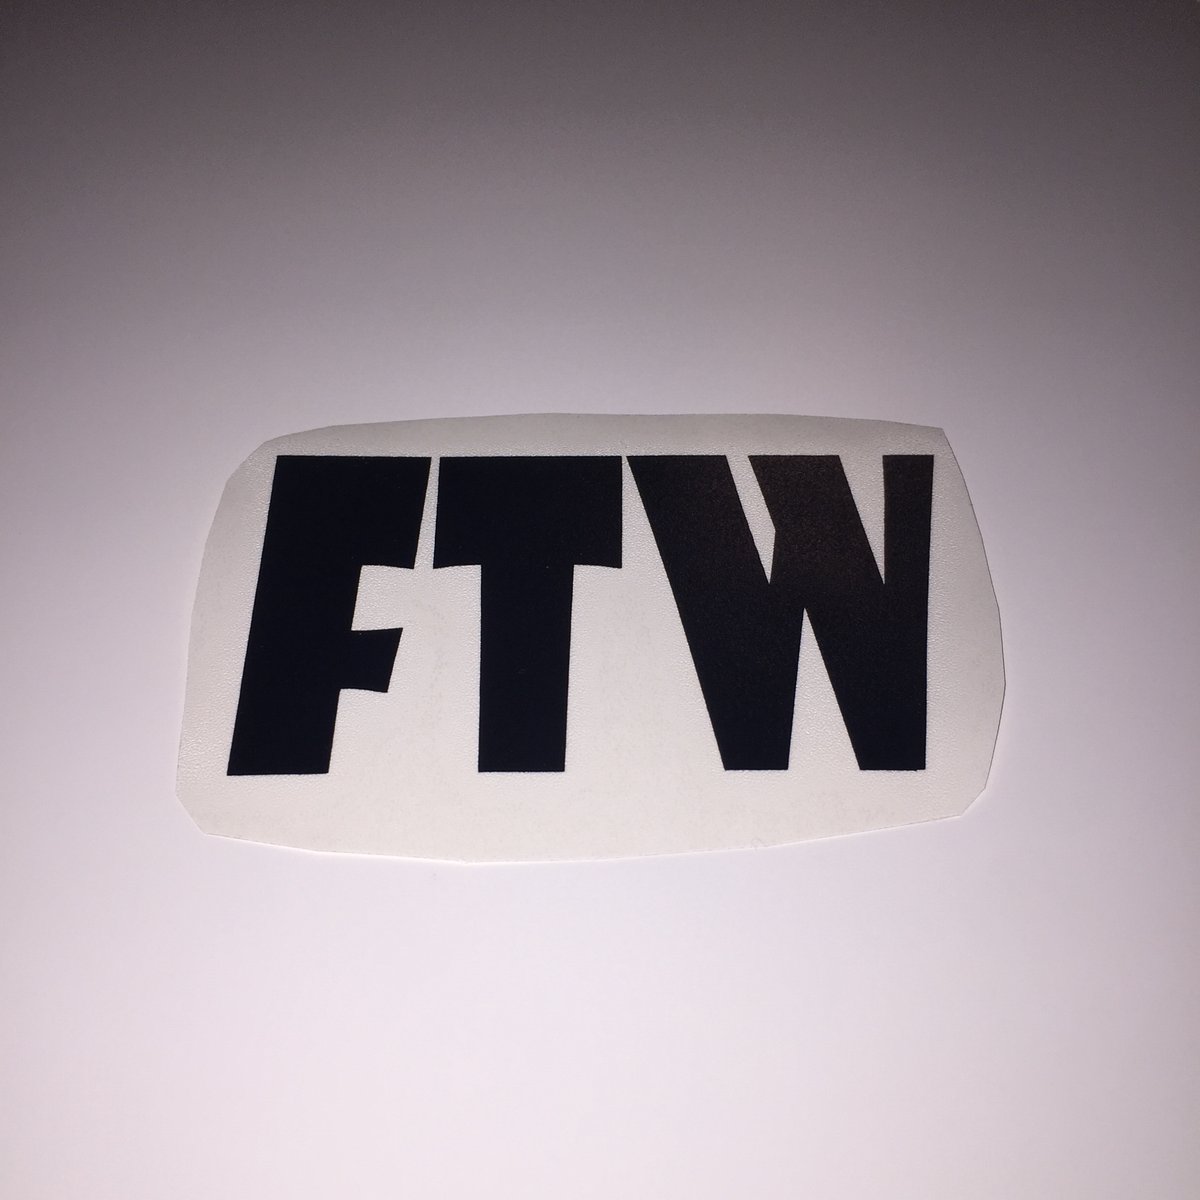 Image of FTW decal